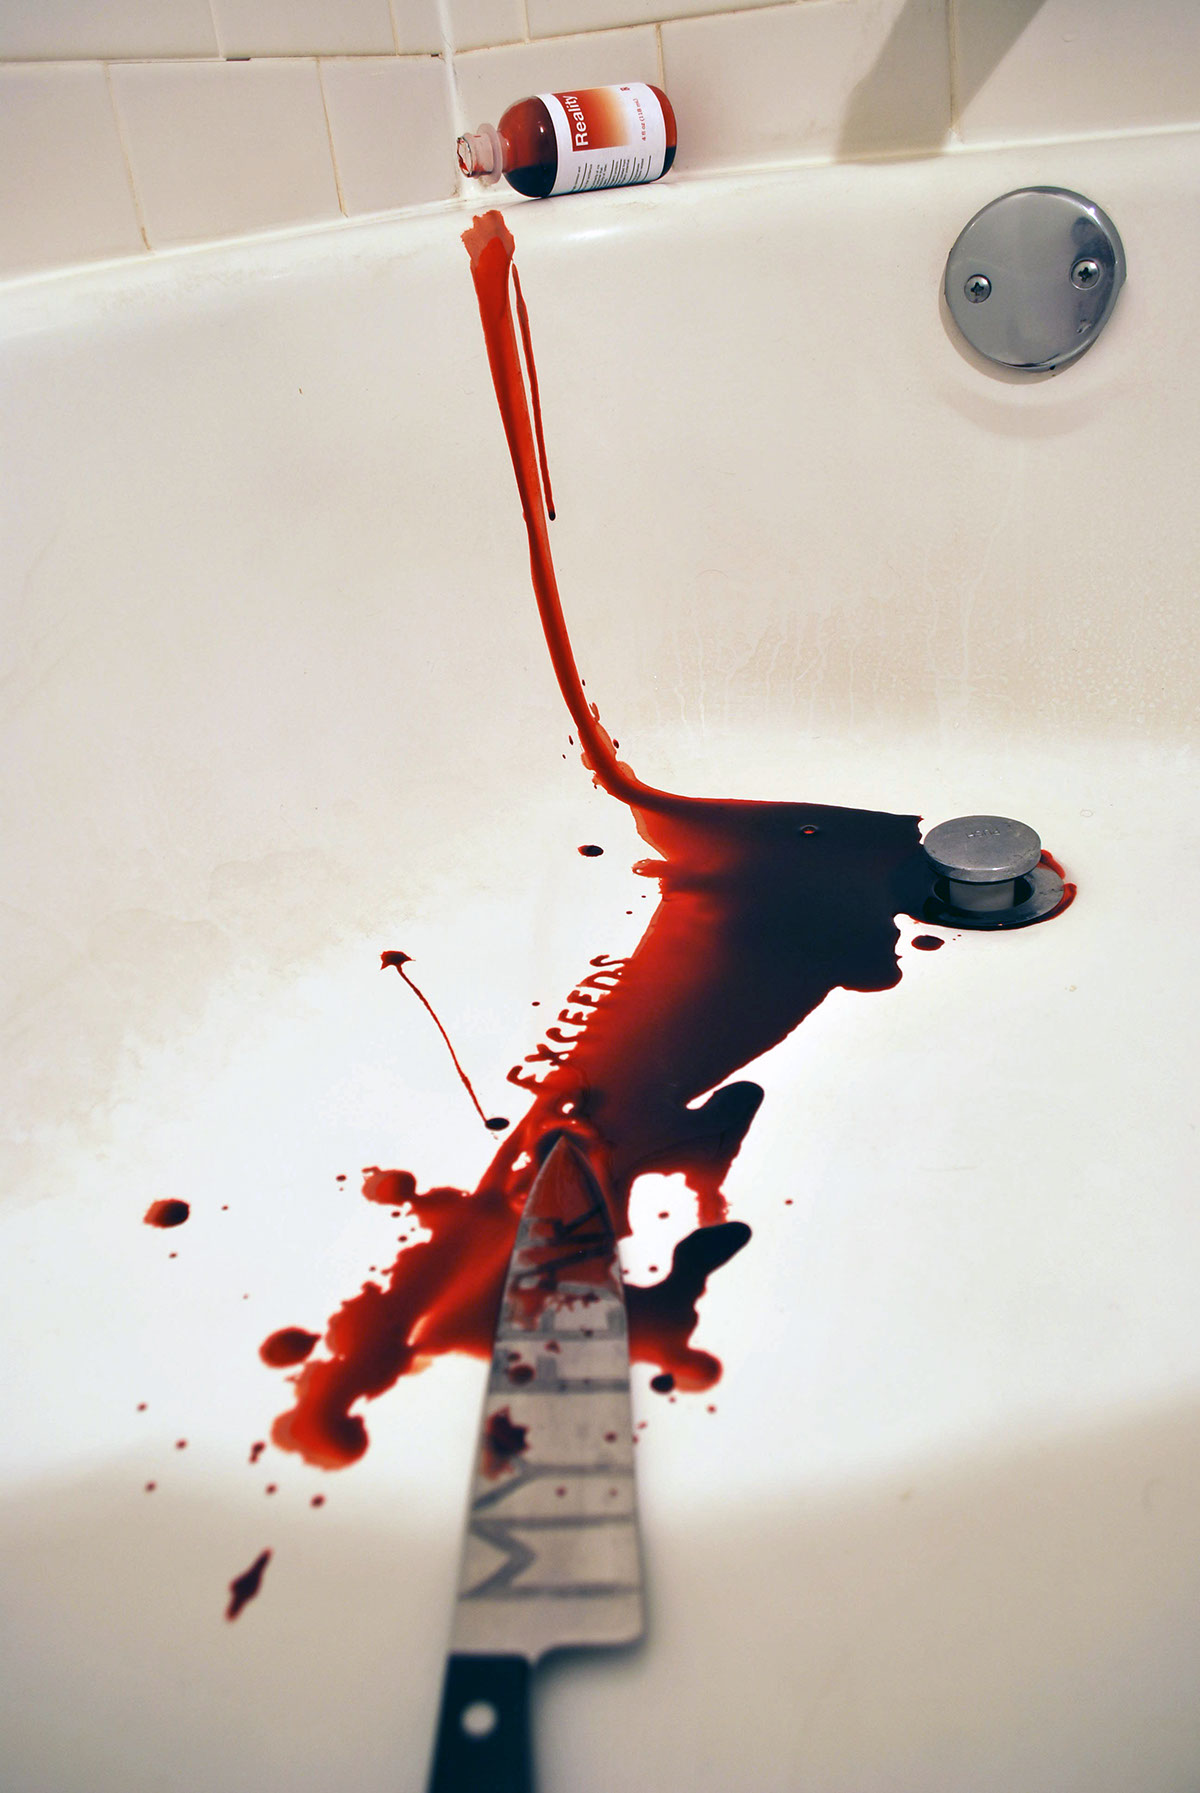 blood video knife fear type sagmeister class motion Sink tub bathroom White red trick Ae after effects student Student work Scary feel type design